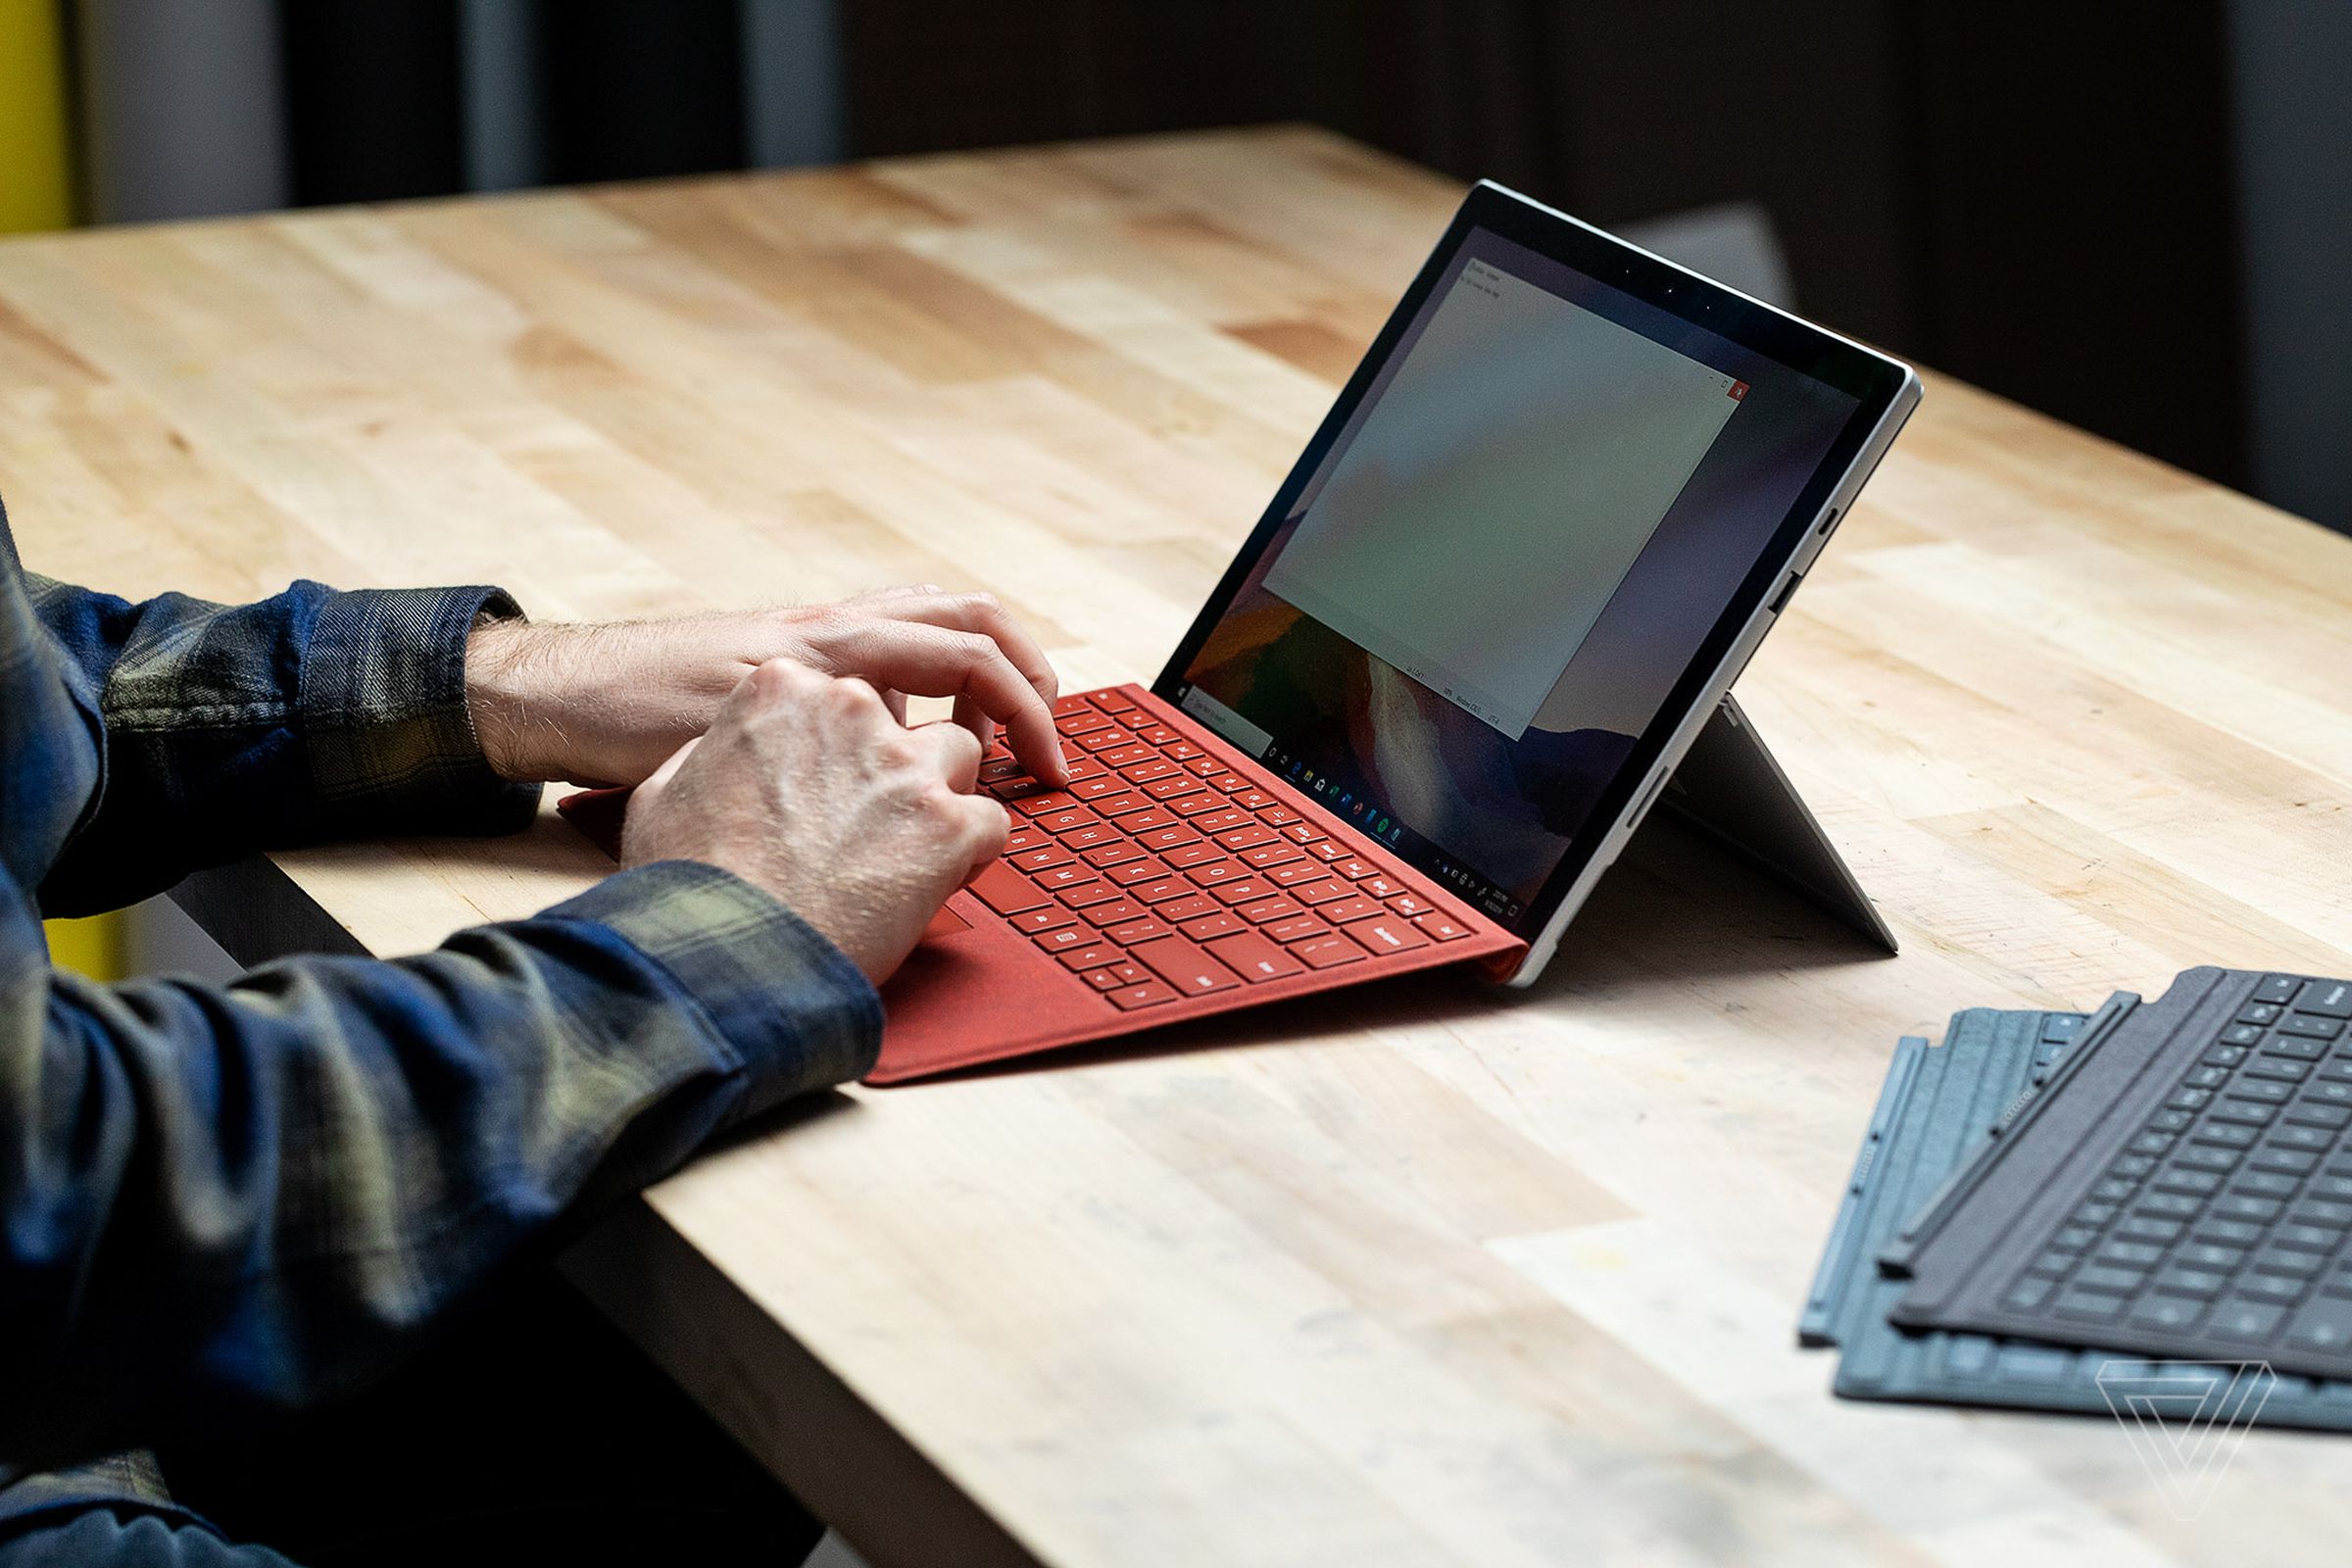 Microsoft is currently offering savings across the Surface lineup.